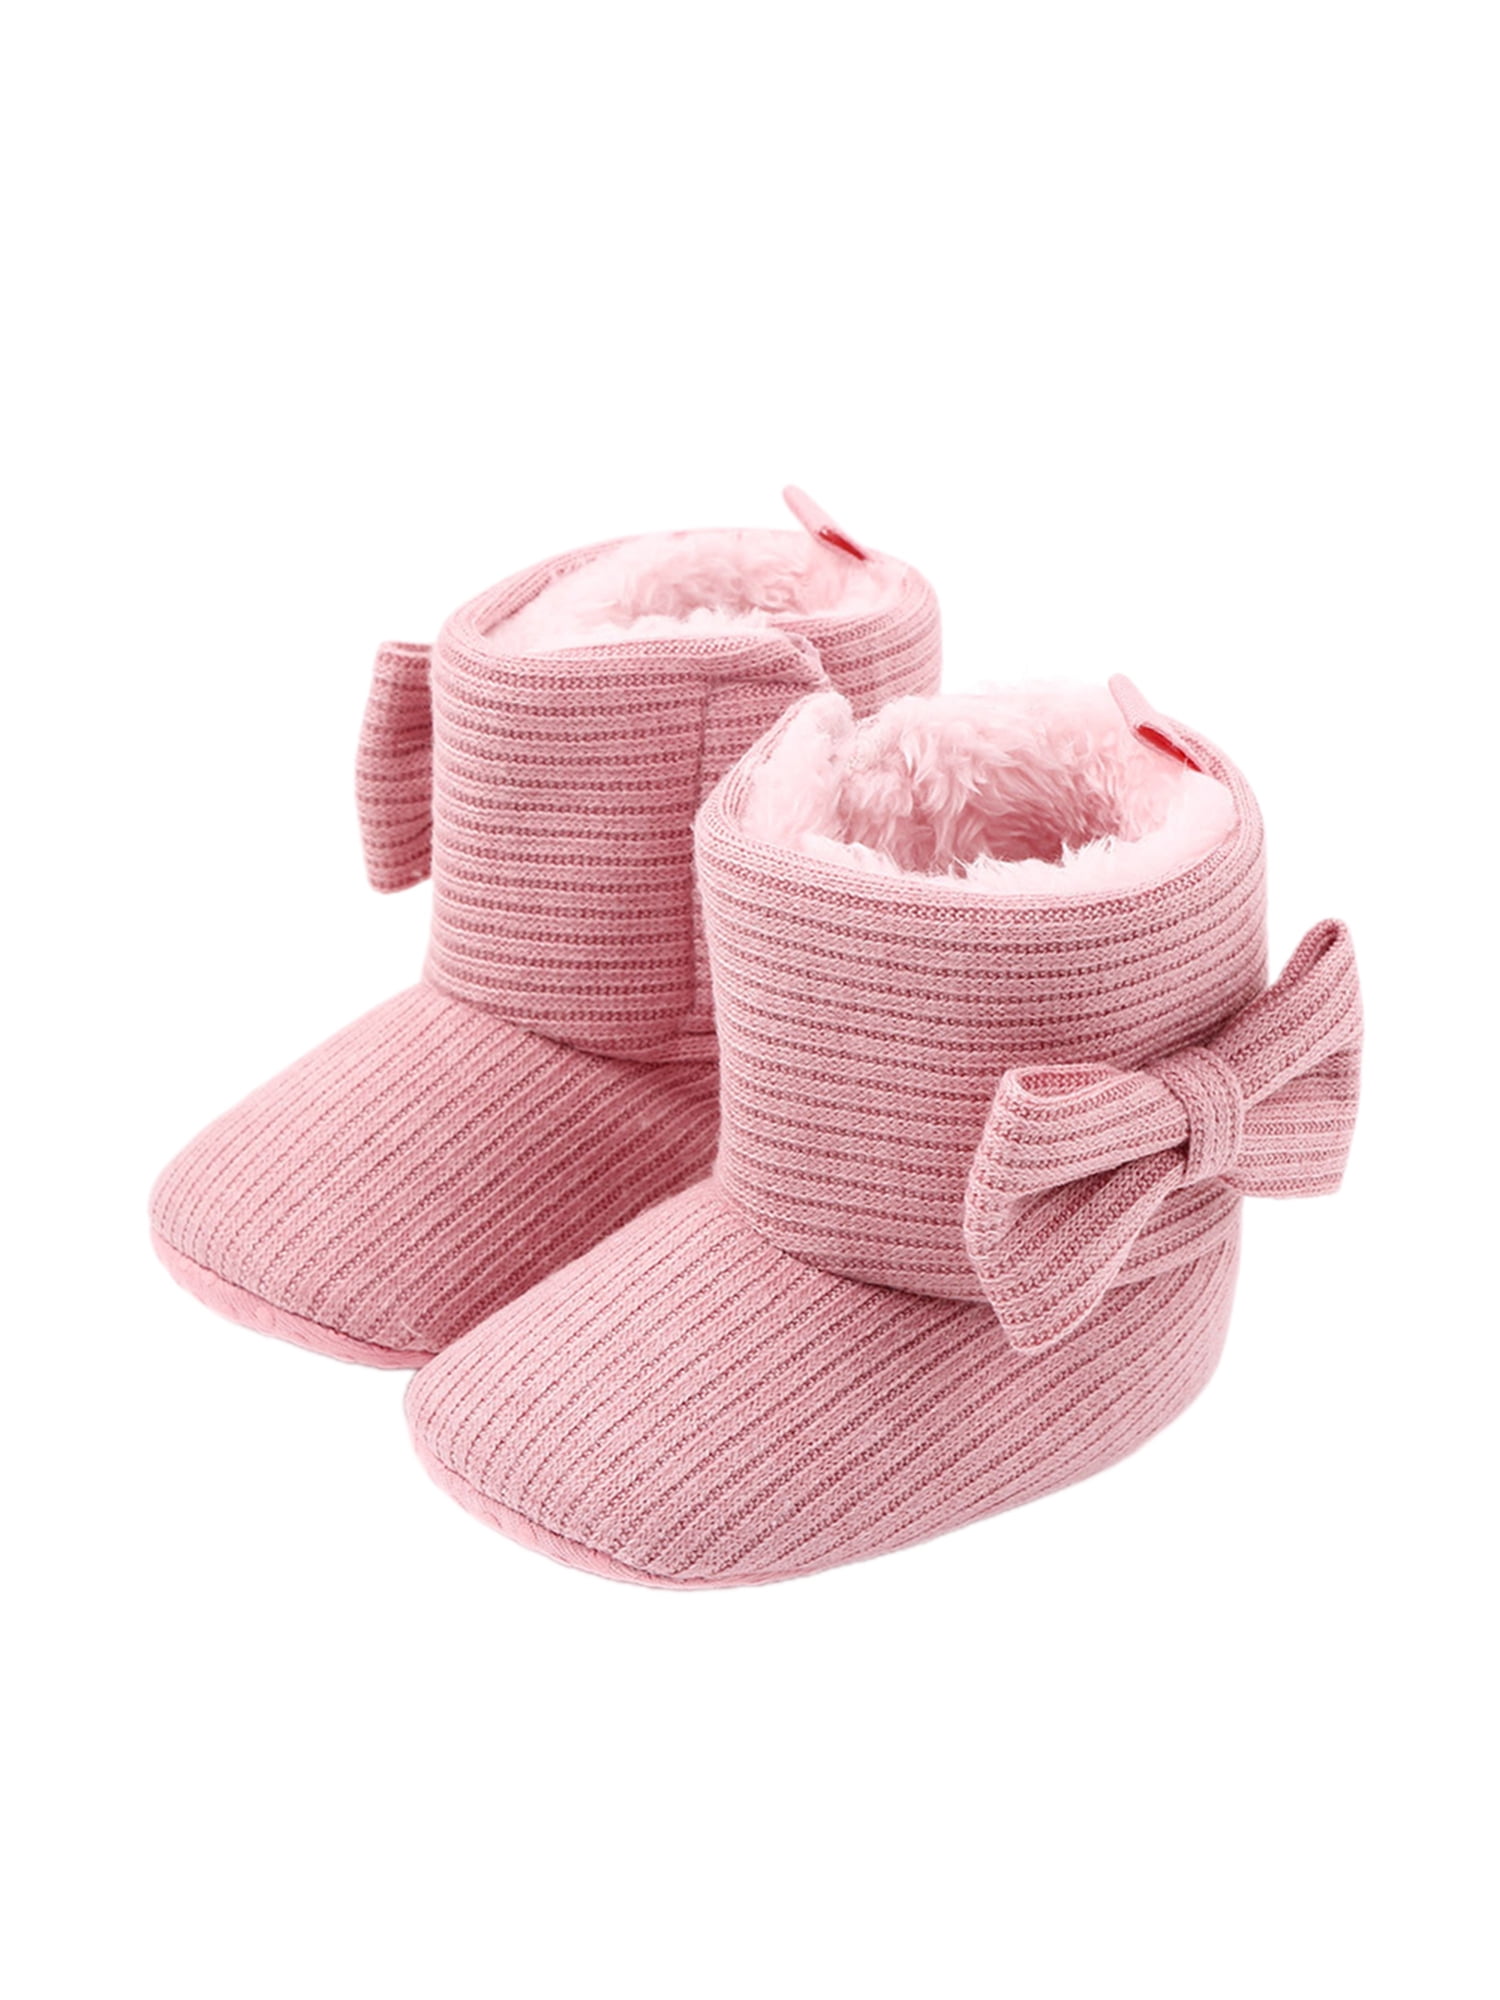 Axinke Baby Girls Warm Soft Sole Crib Shoes Boots with Bowknot 